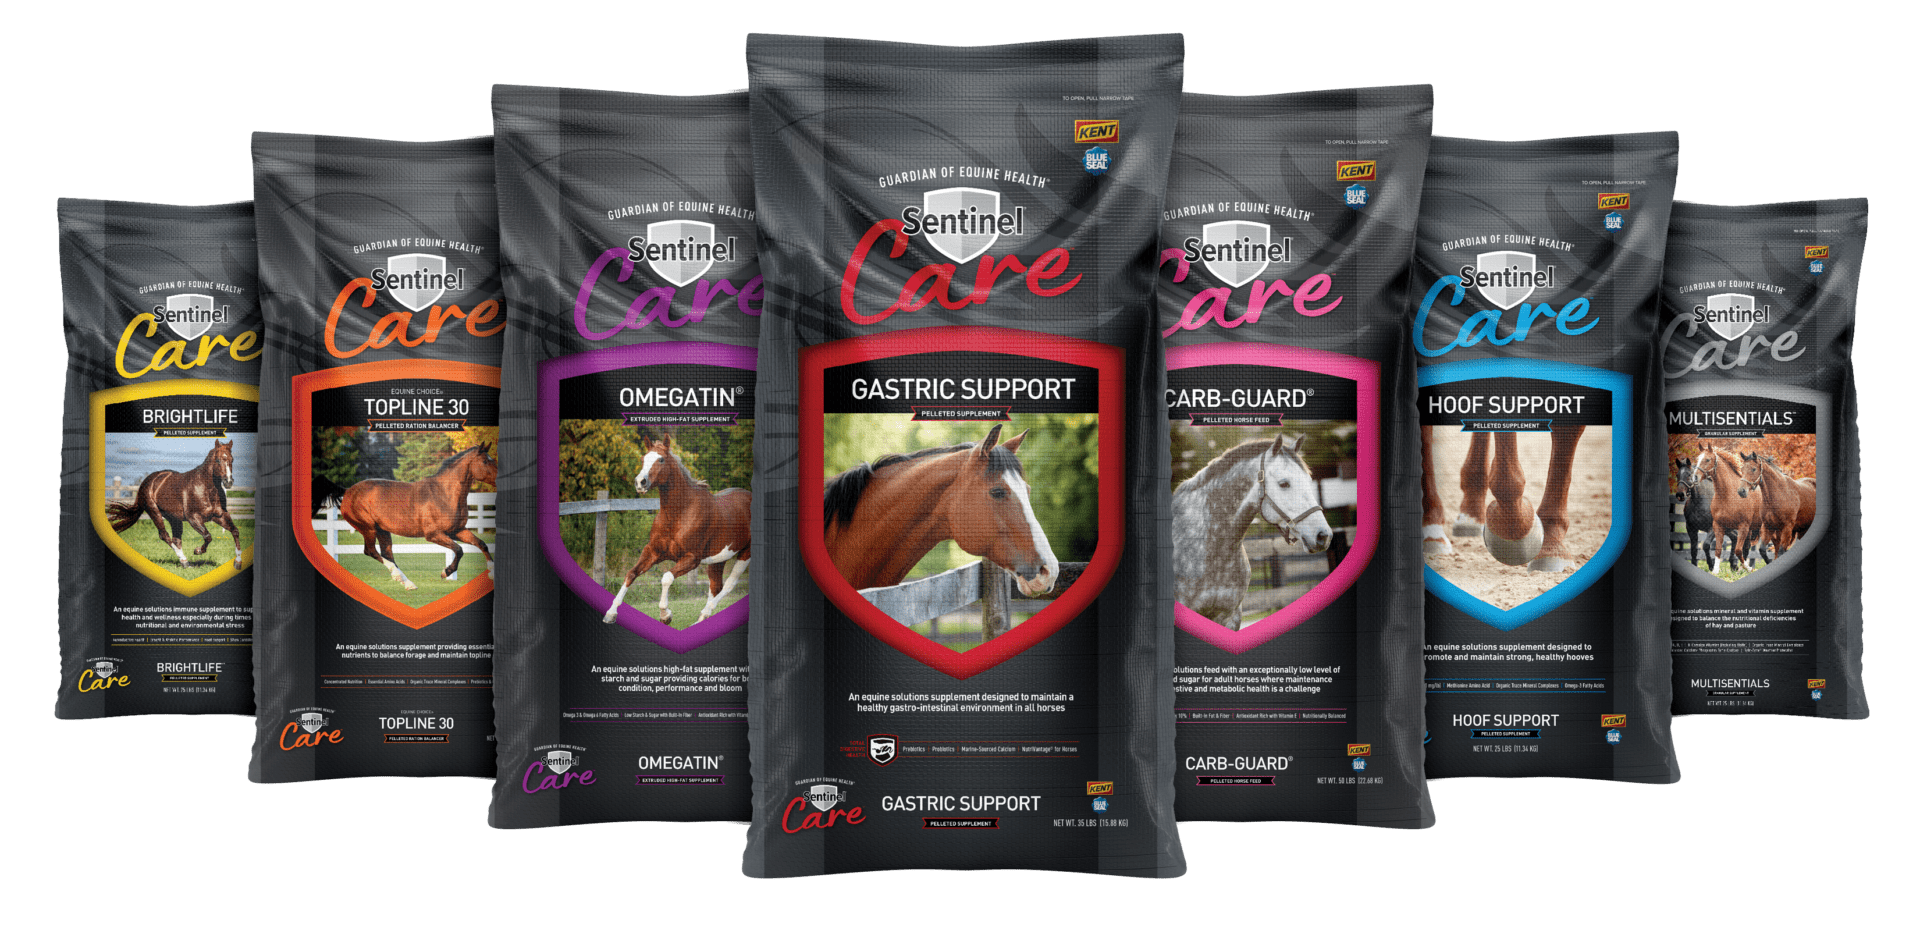 Sentinel Care Full Lineup of Horse products